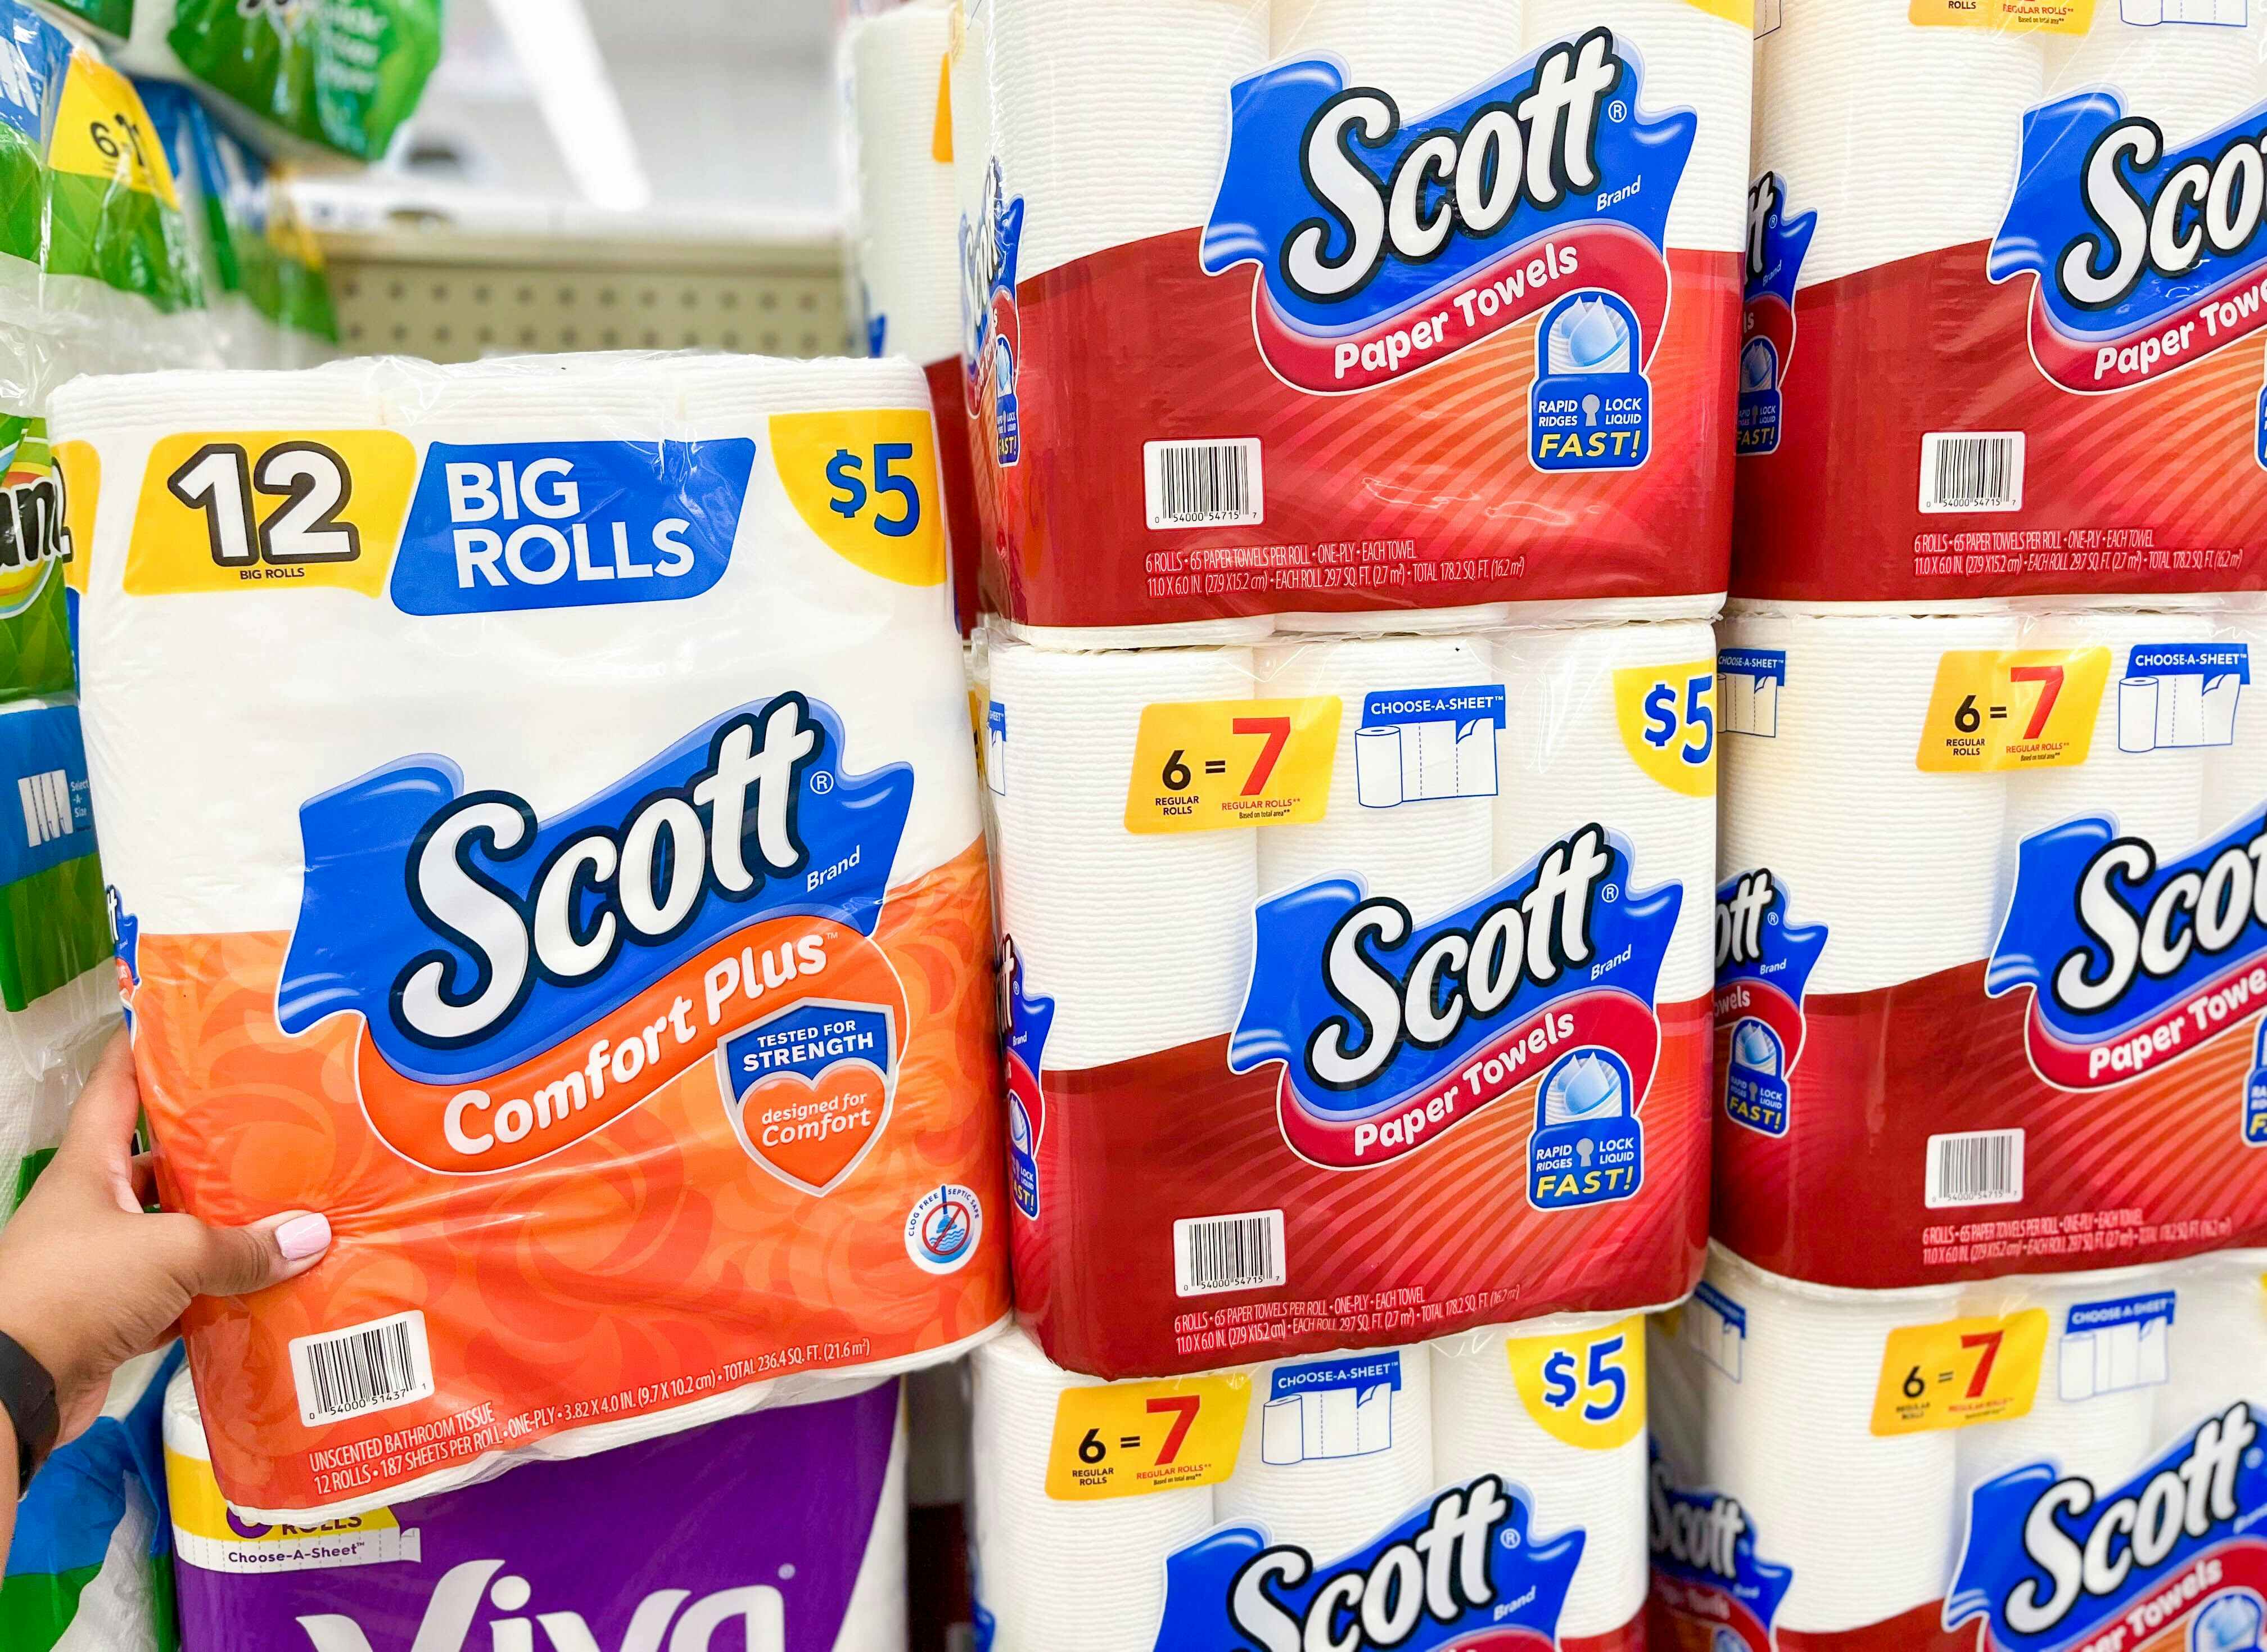 Hand holding a pack of Scott Toilet Paper next to a stack of Scott Paper Towel Packs